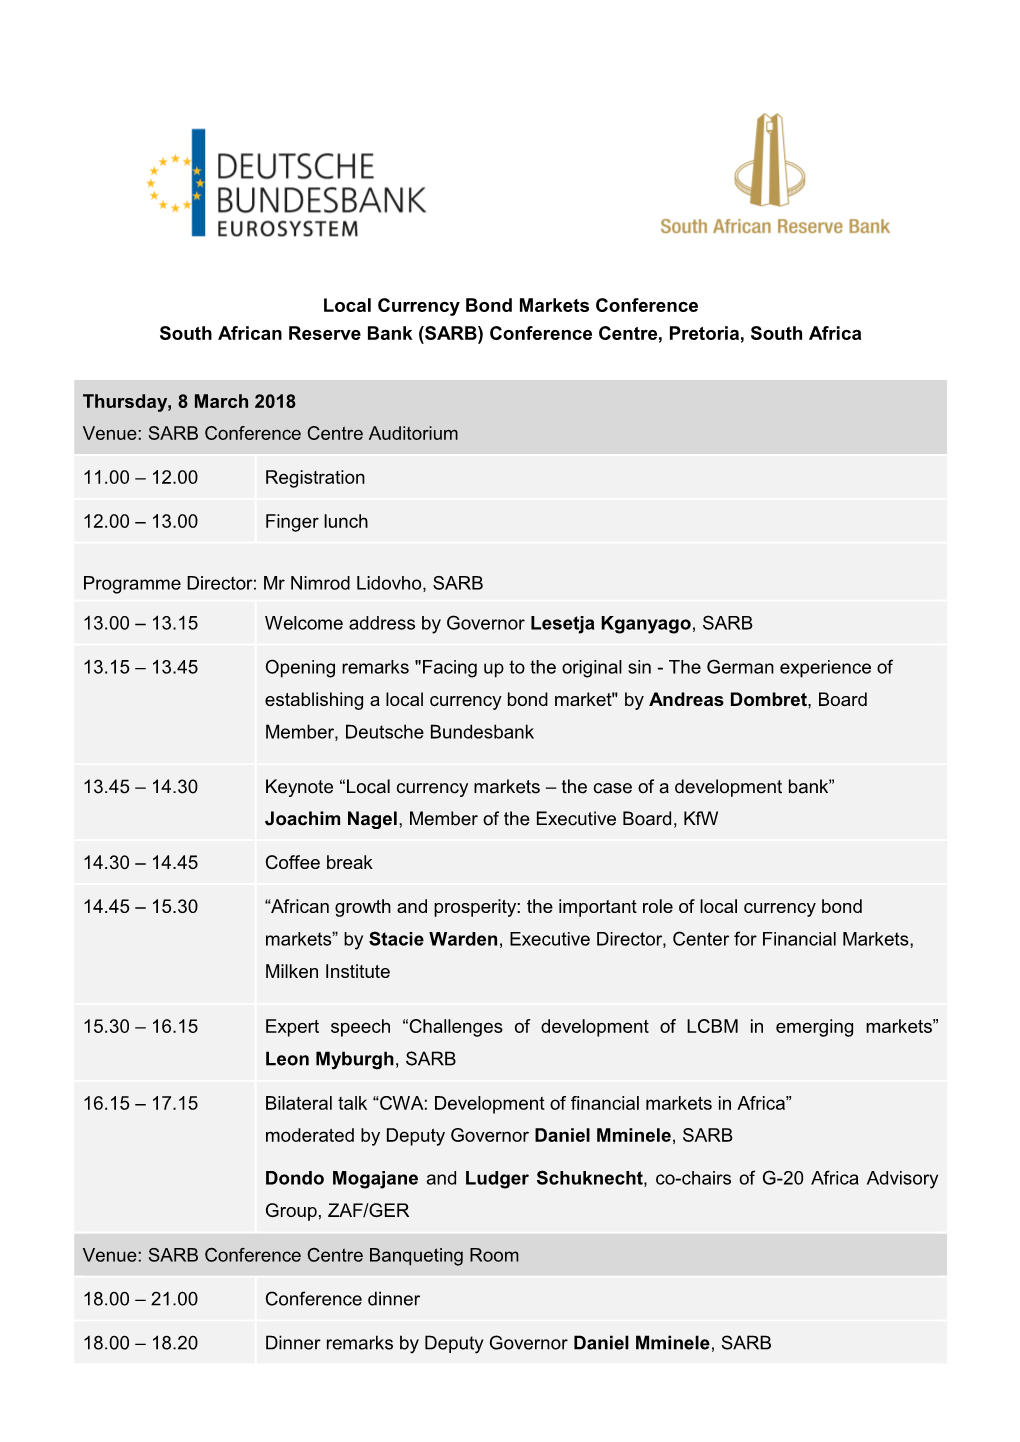 Local Currency Bond Markets Conference South African Reserve Bank (SARB) Conference Centre, Pretoria, South Africa